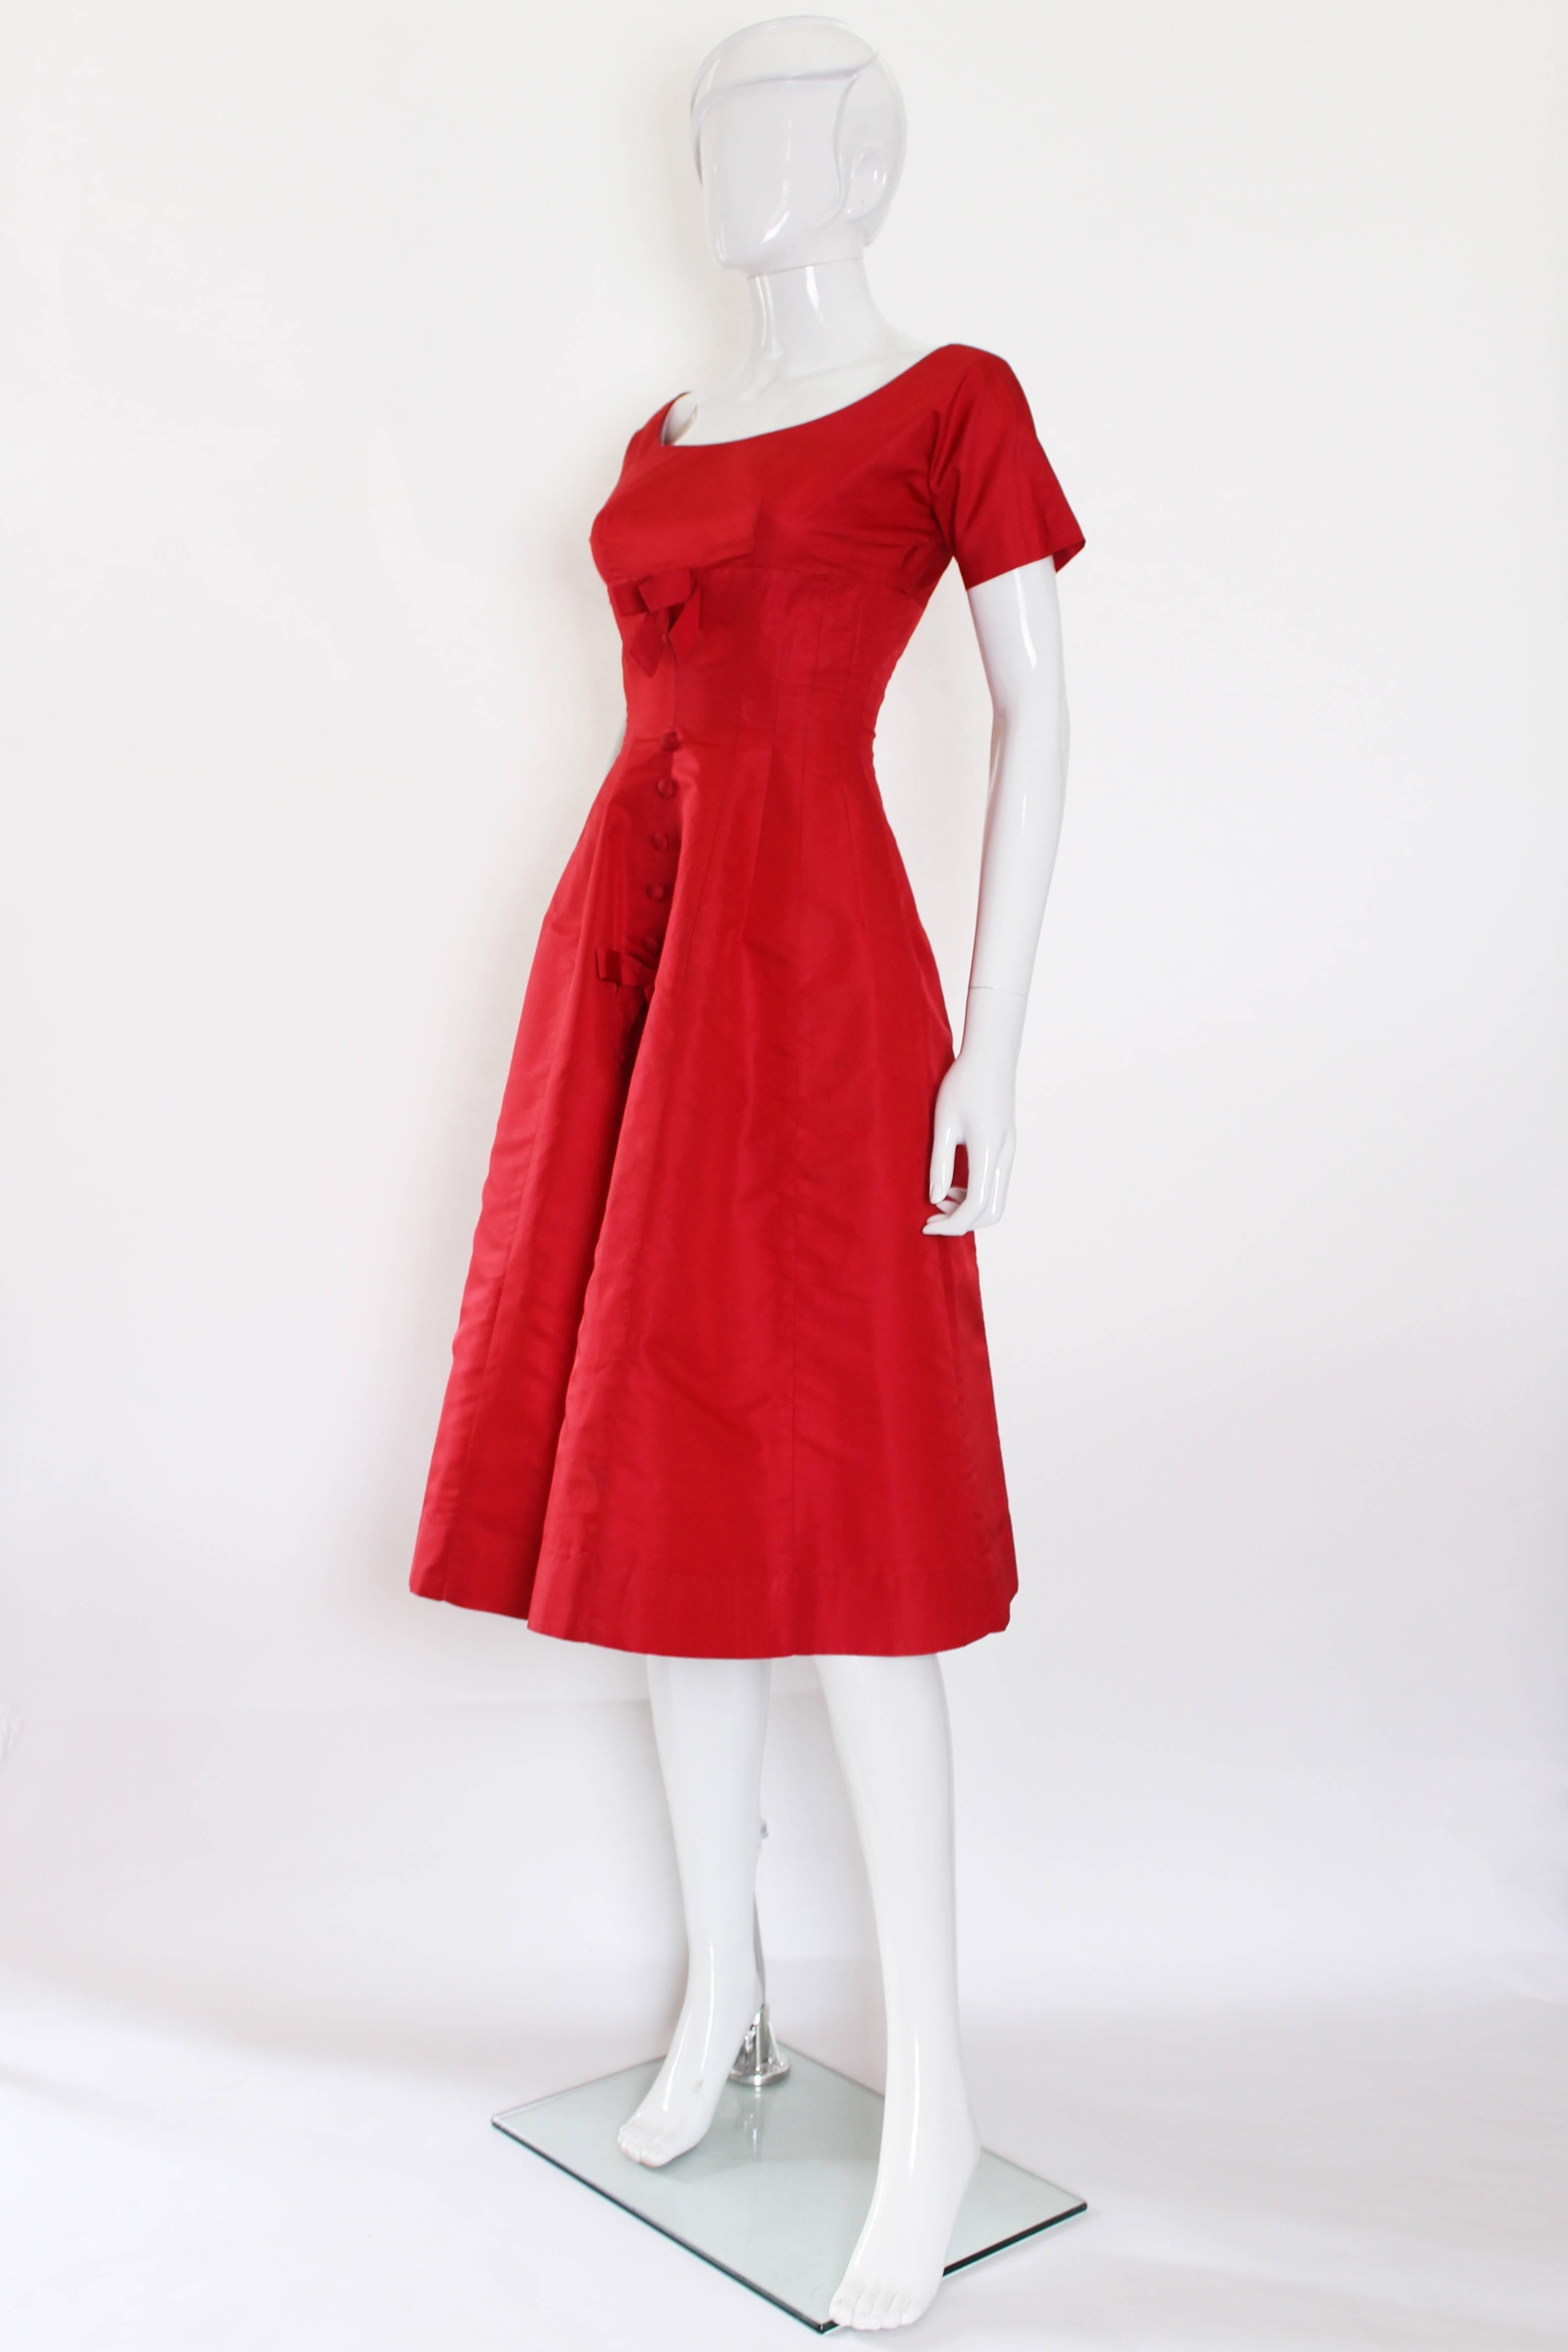 

This stunning 1950s party dress has an amazing shape and structure to it. The waist is drawn right in with 20 panels making up the dress from the bust, that flutes out from the waist to give great volume. The front has two bows and five buttons